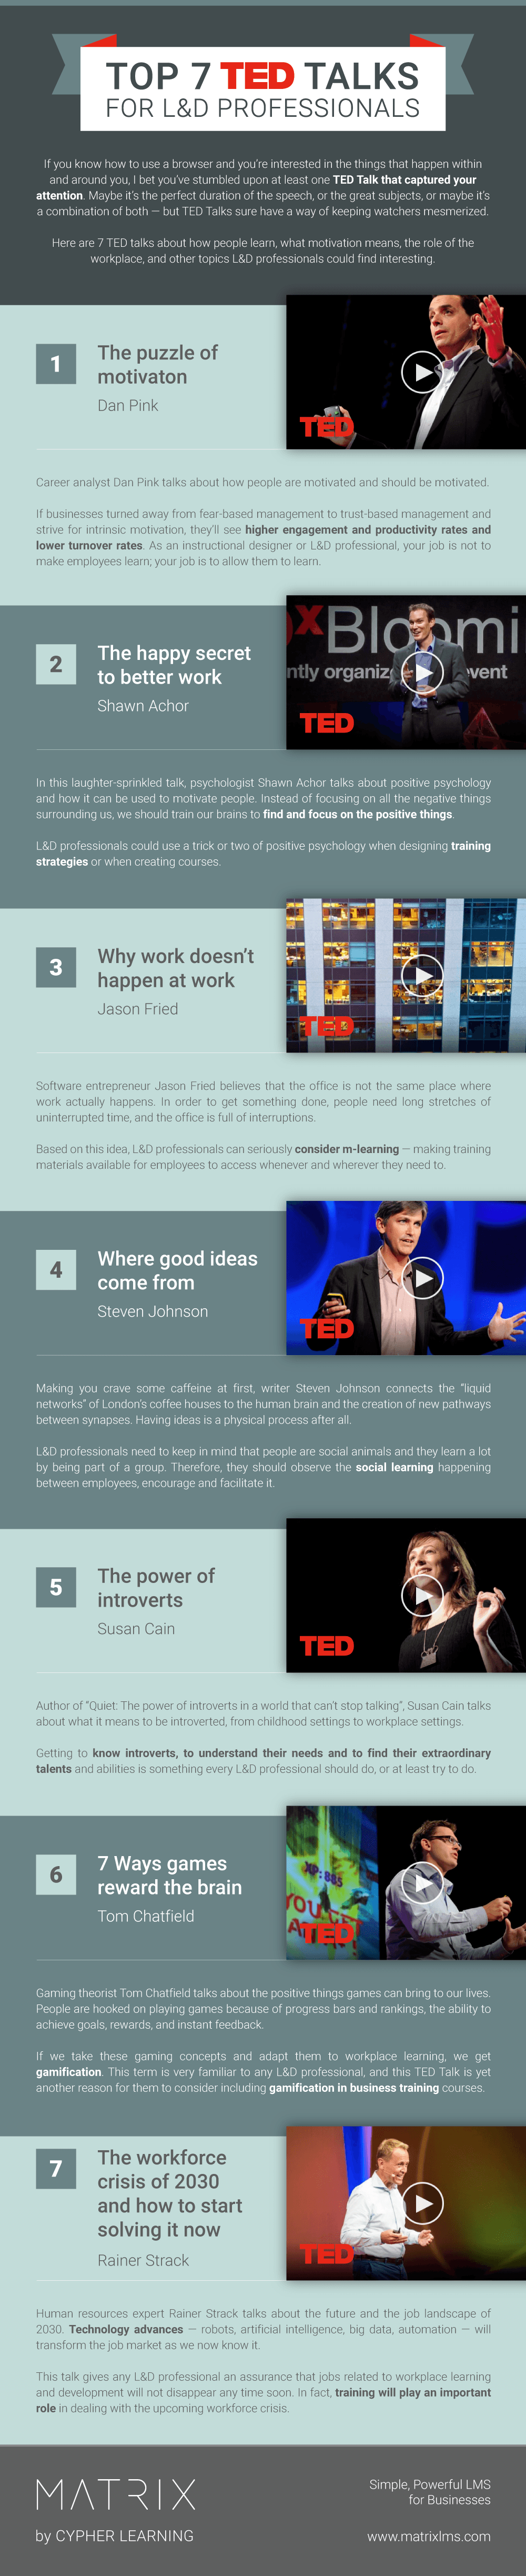 Top 7 TED Talks for L&D Professionals Infographic